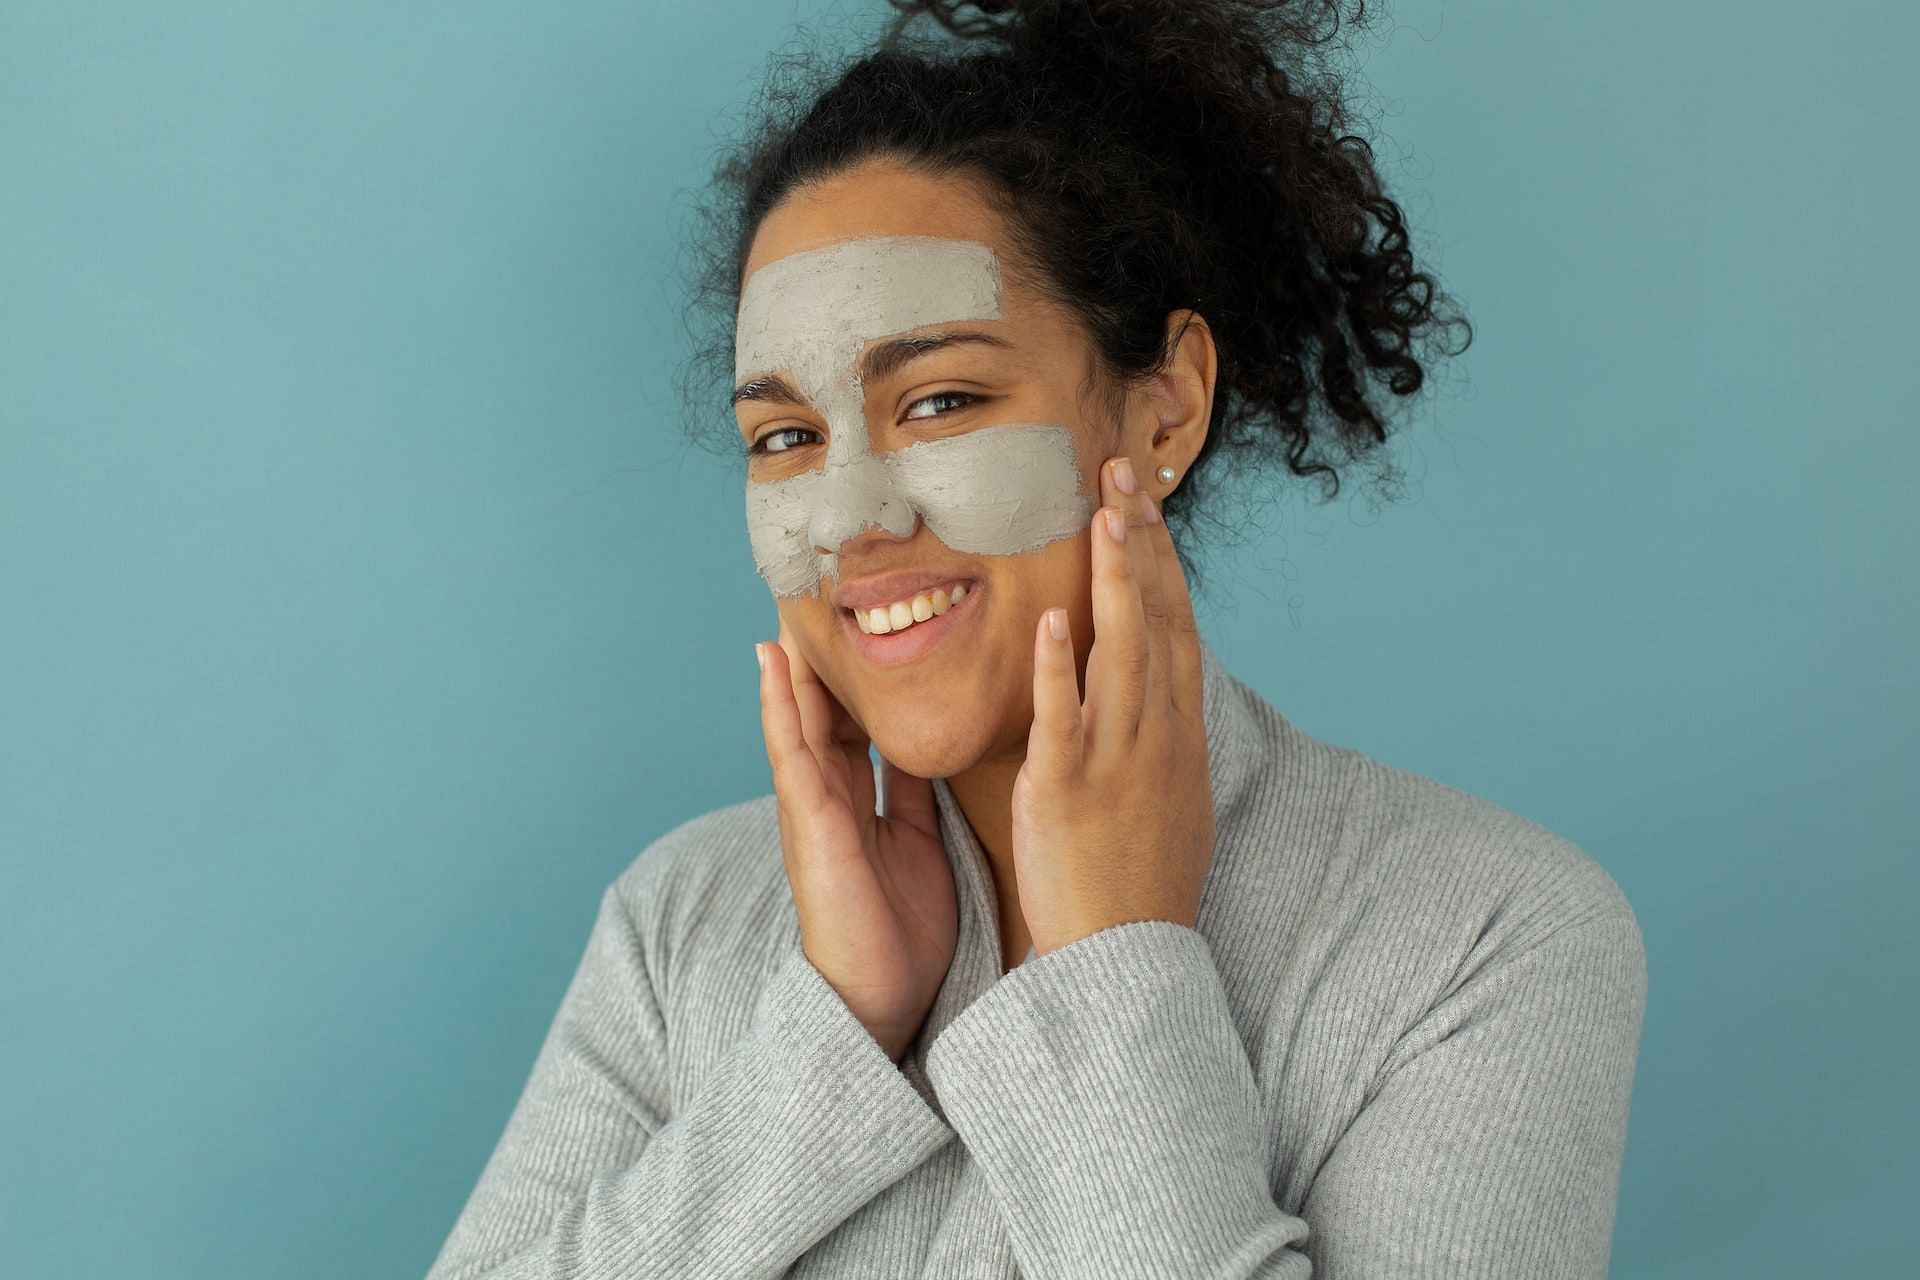 Kaolin is used in a variety of skin and hair care products. (Photo via Pexels/Monstera)